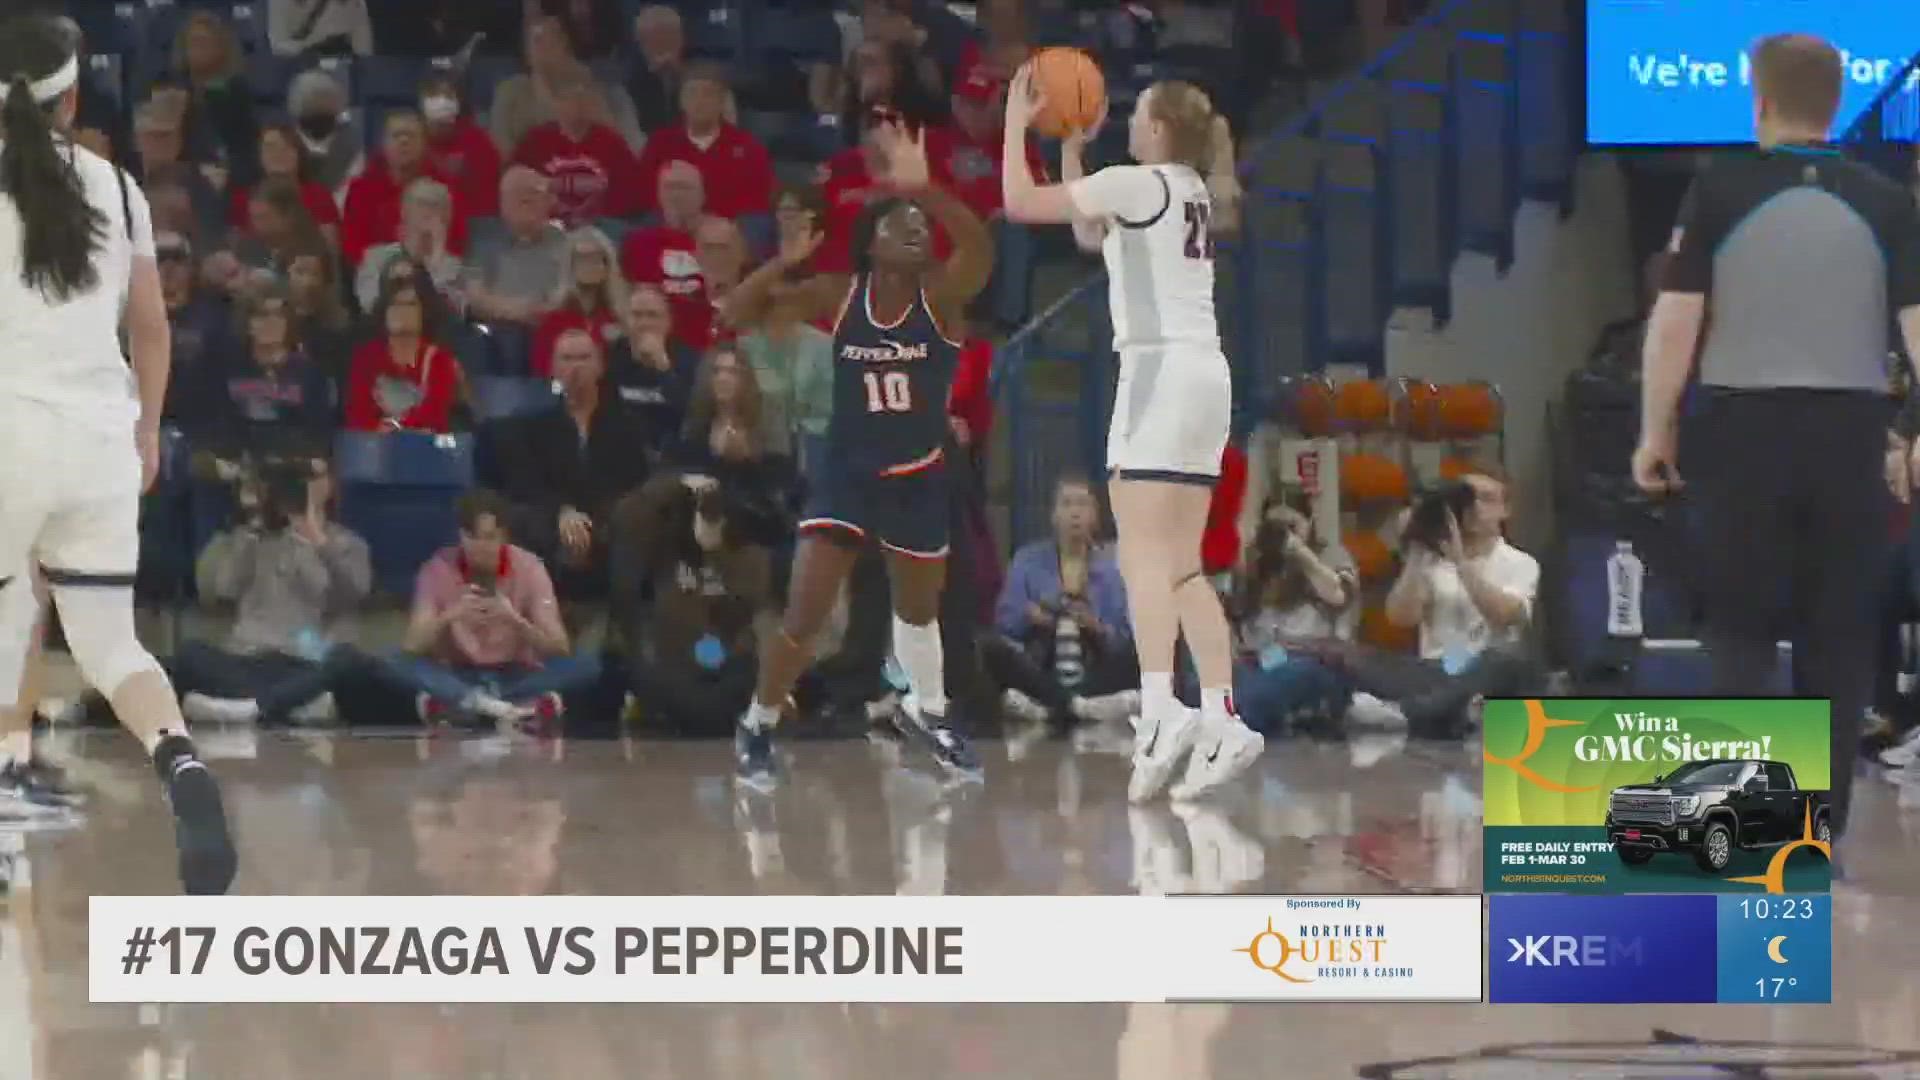 Brynna Maxwell made six straight behind the arc and scored a season-high 26 points to lead No. 17 Gonzaga to a 67-49 win over Pepperdine.